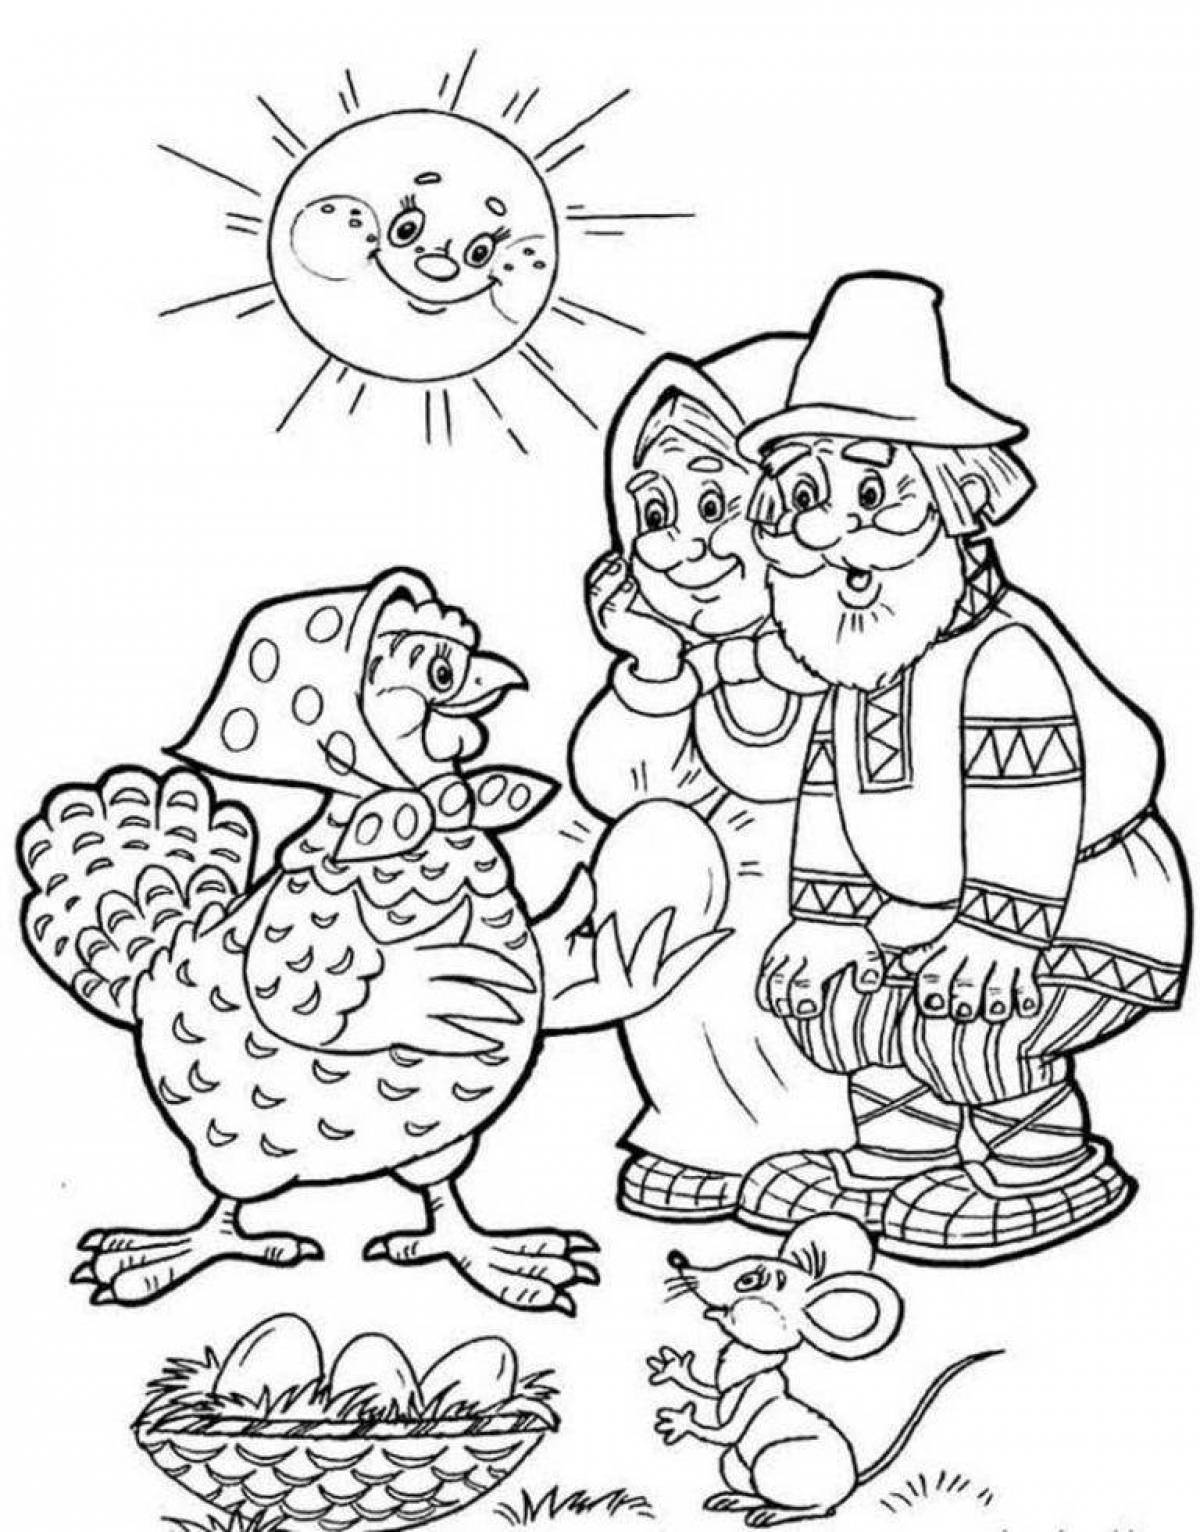 Amazing chick pockmarked coloring book for babies